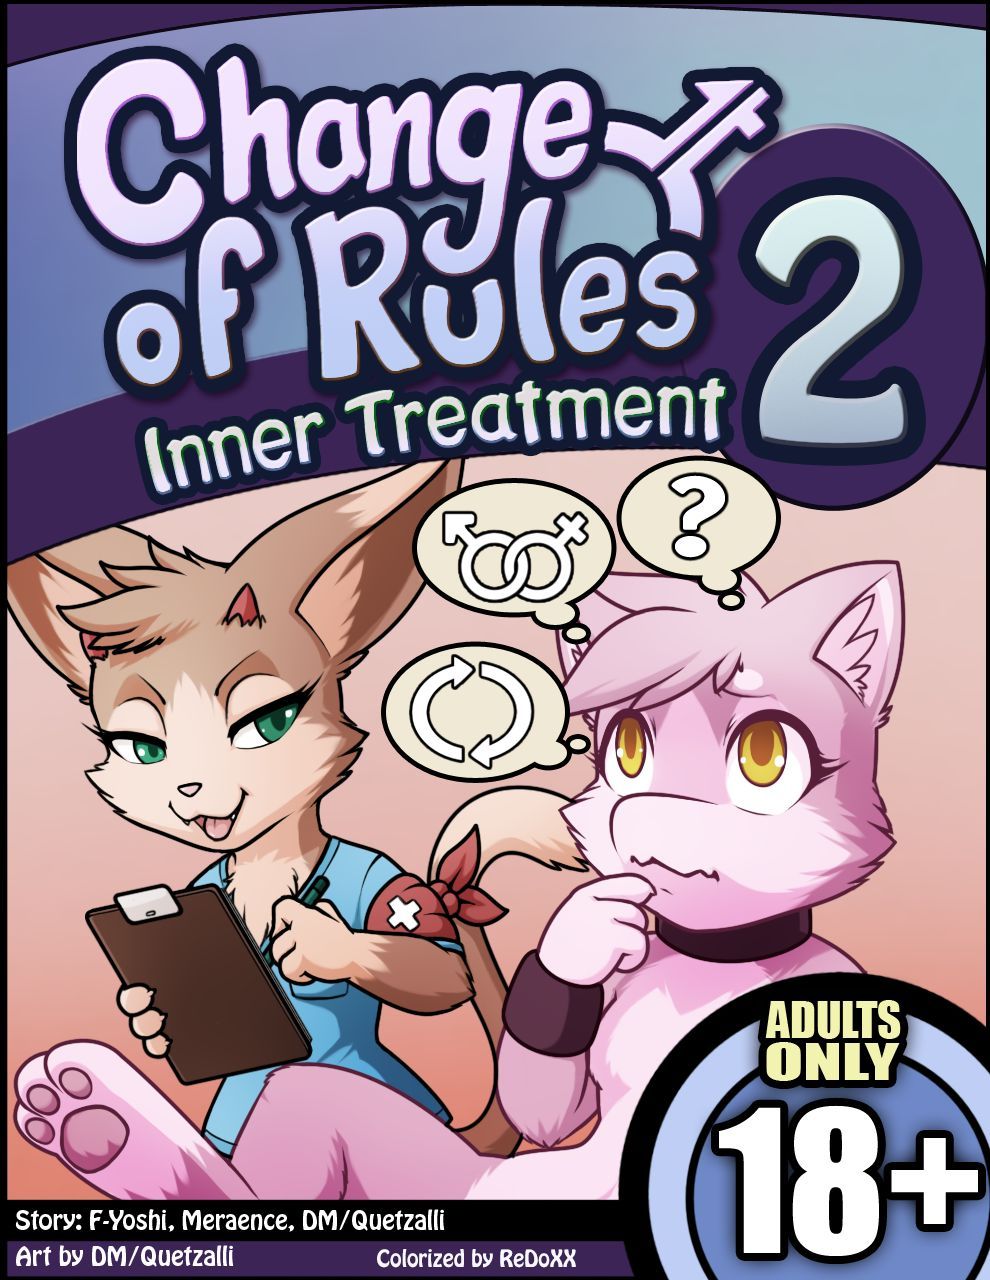 [Darkmirage] Change of Rules 2  Inner Treatment [French] 1